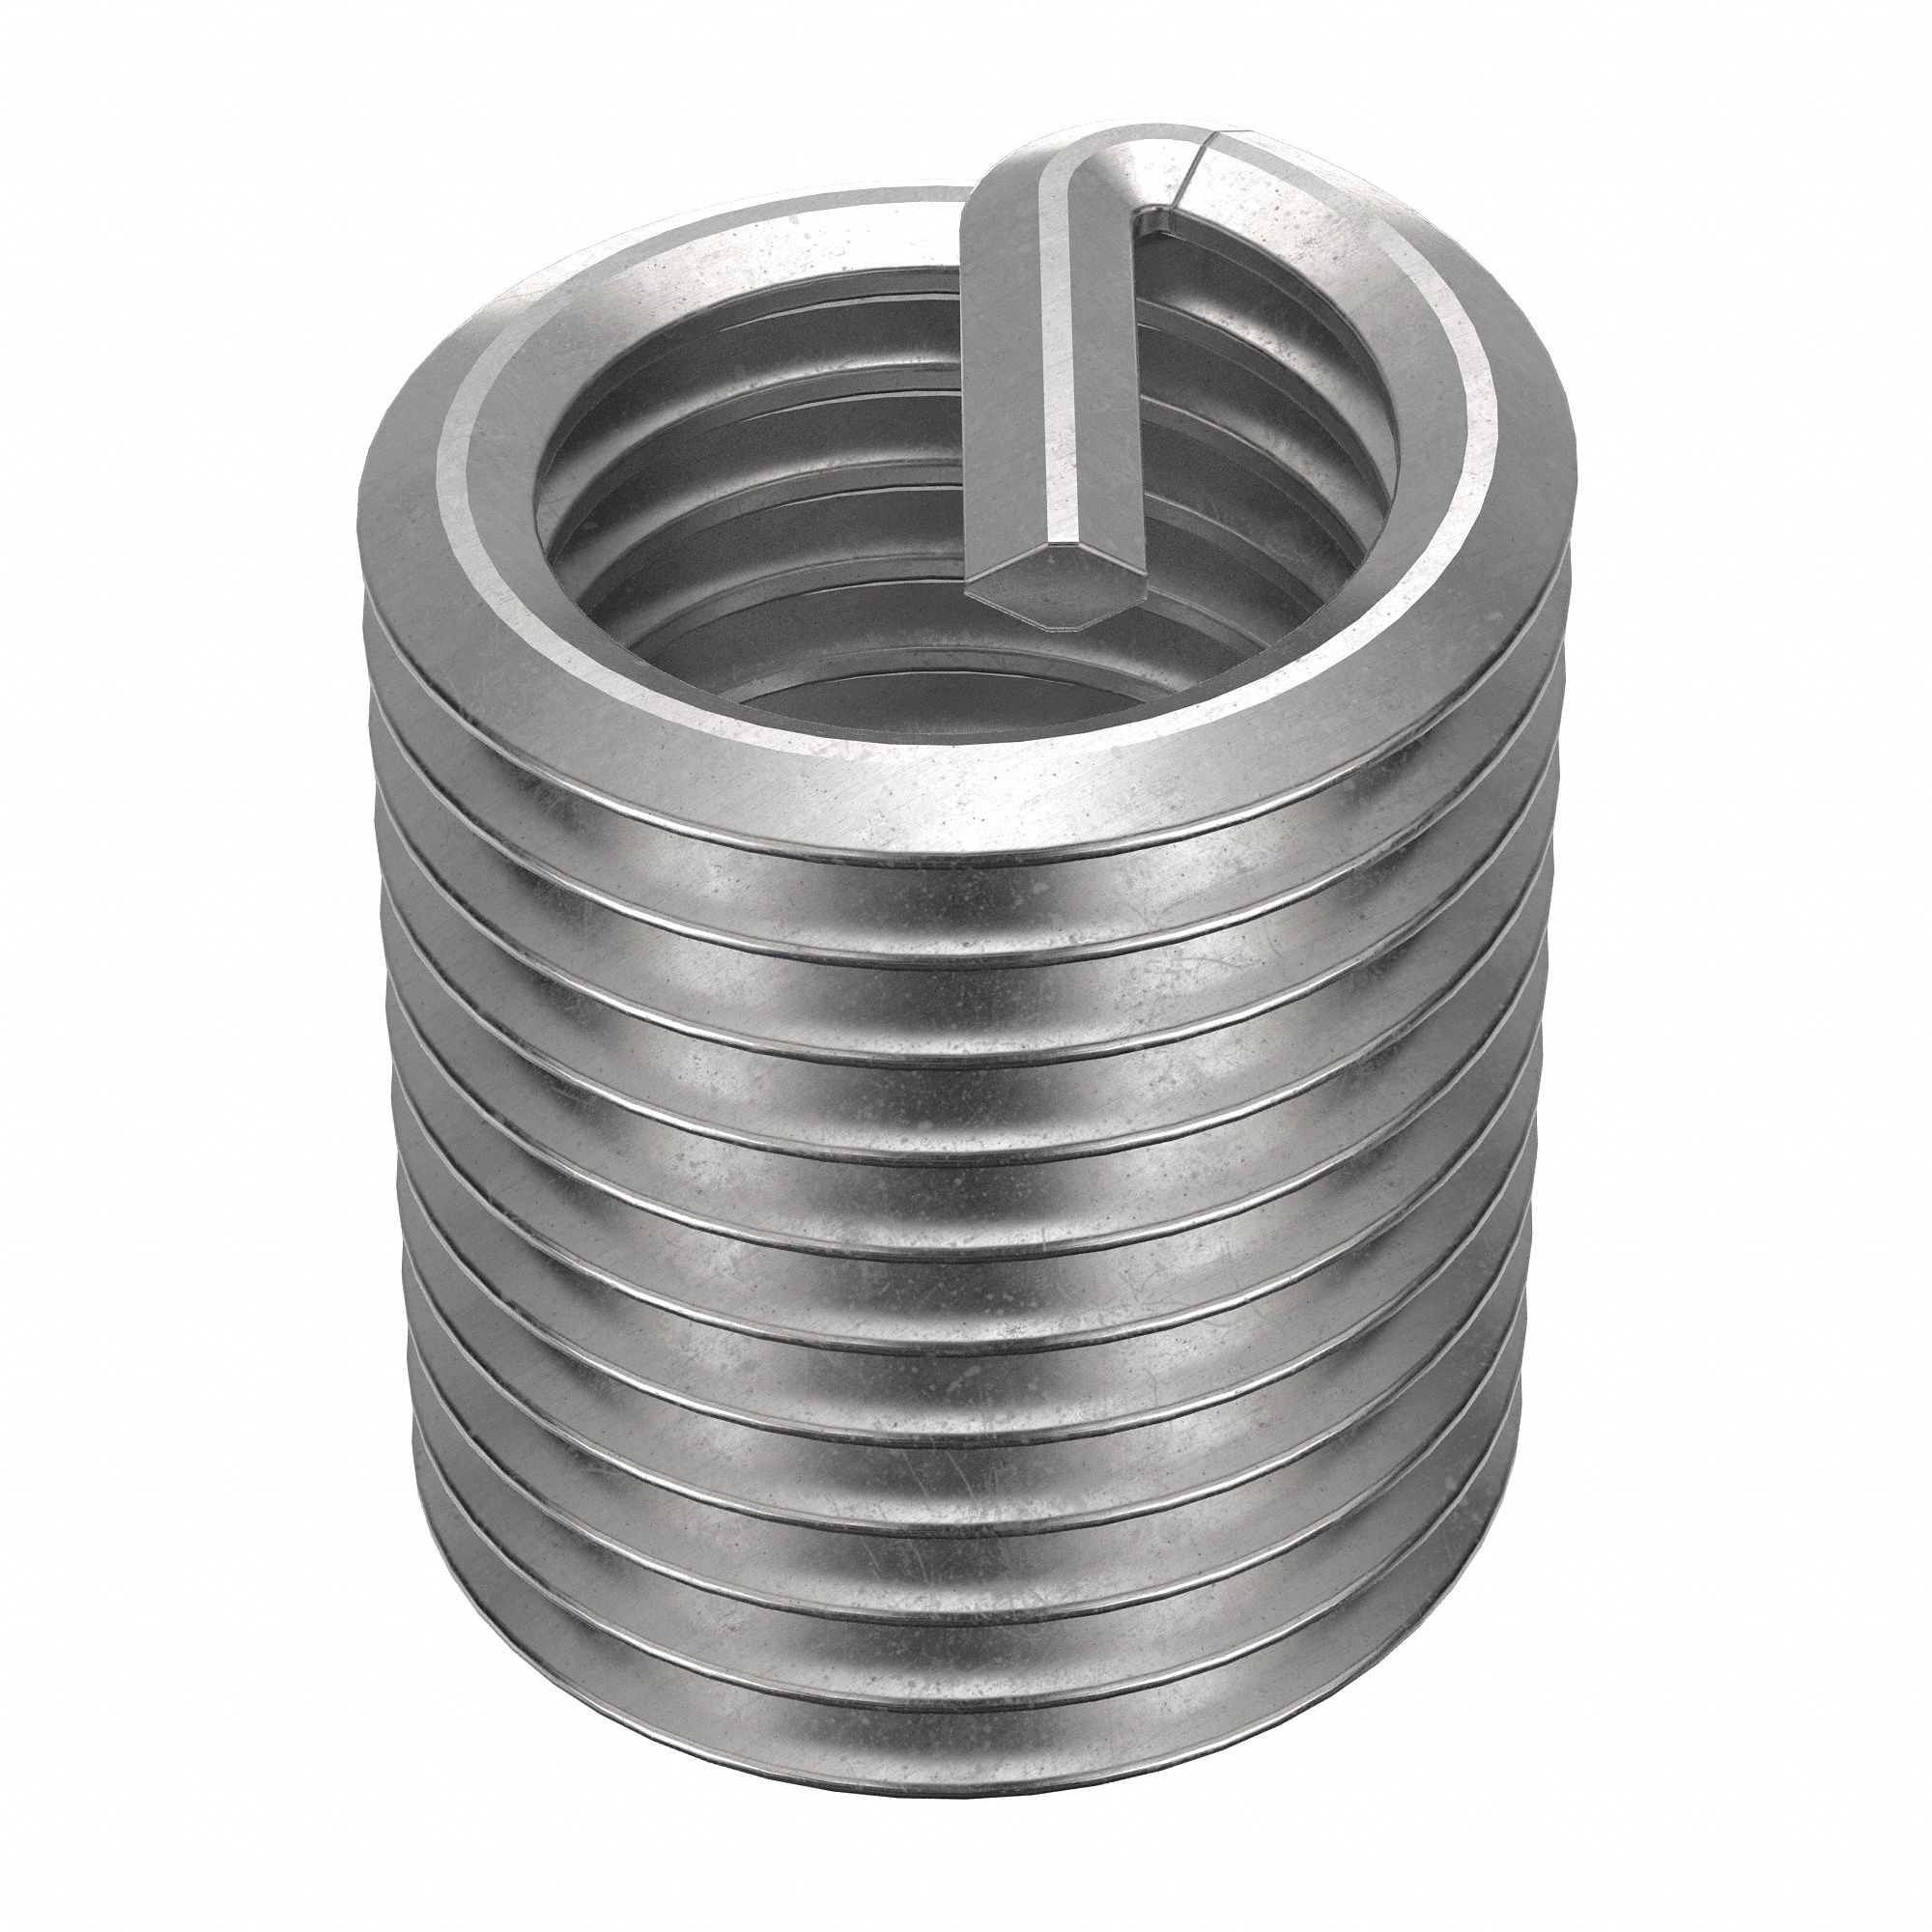 Stainless Steel Helicoil Thread Insert 7/16-14 x 2 Diameter Qty-25 